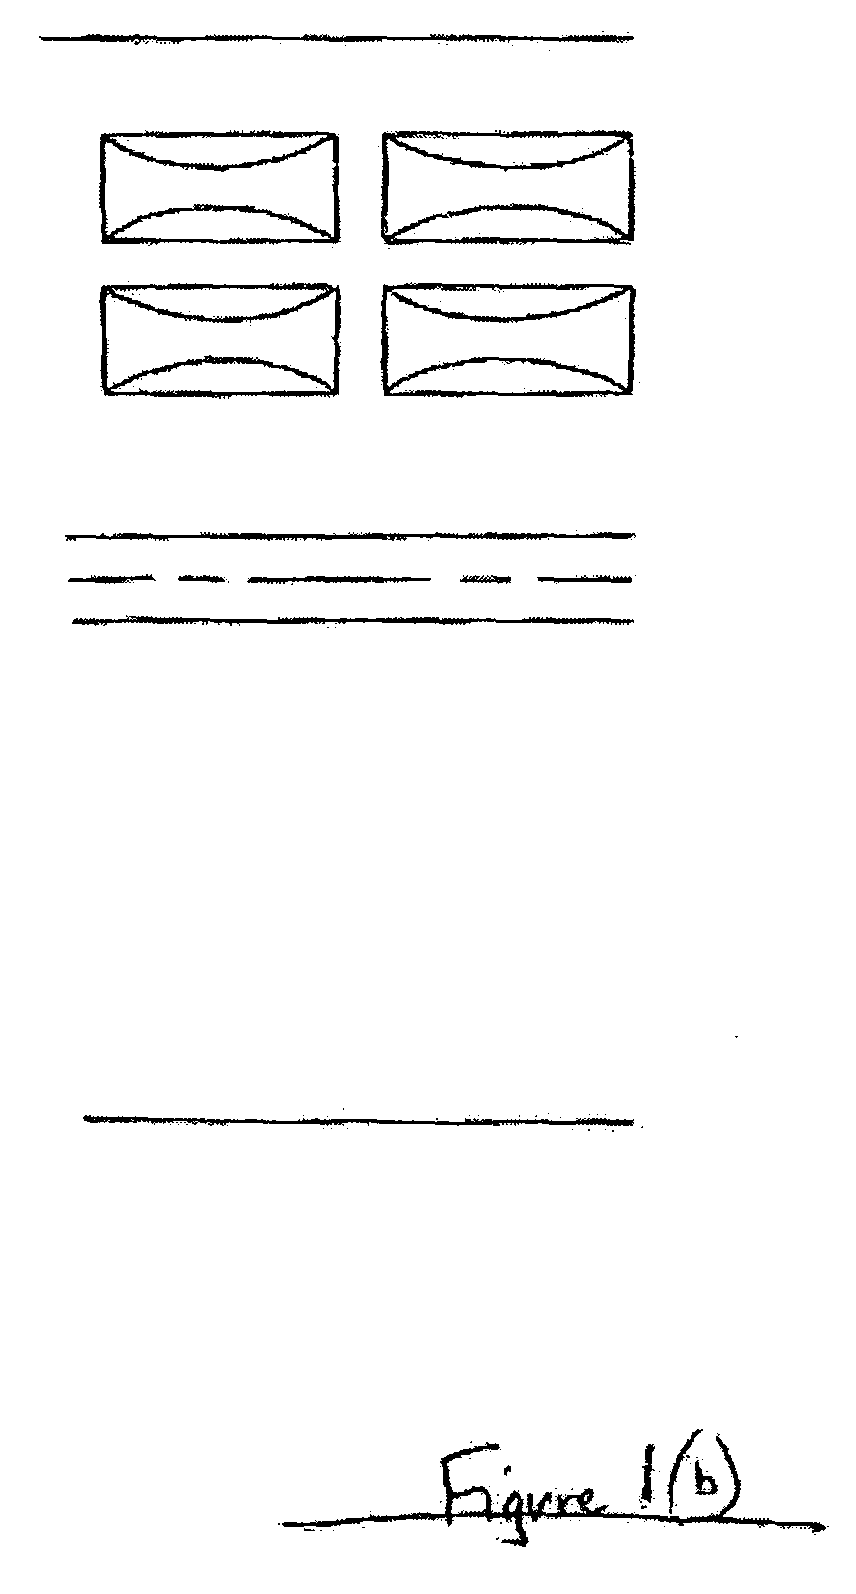 Method for forming staple pockets of a surgical stapler